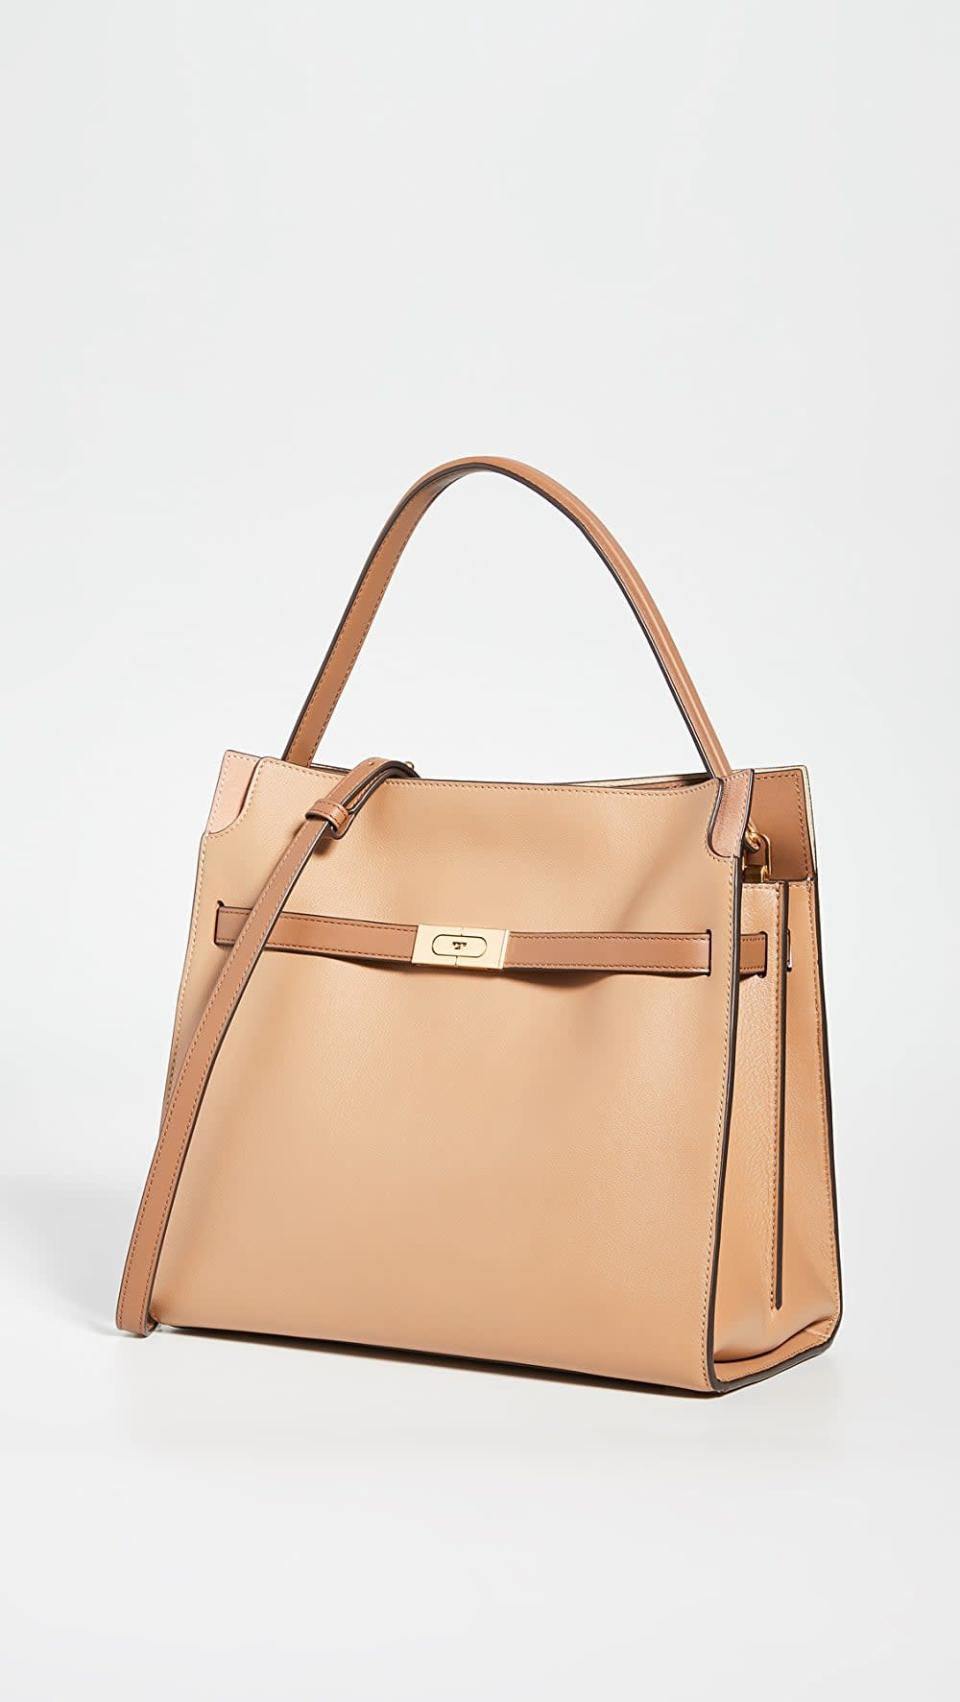 <p>This <span>Tory Burch Lee Radziwill Double Bag</span> ($1,098) will make you feel like a boss. It's so elegant, and the light leather is great for summer. We love that it has a top handle and crossbody strap; there are so many ways to wear it.</p>